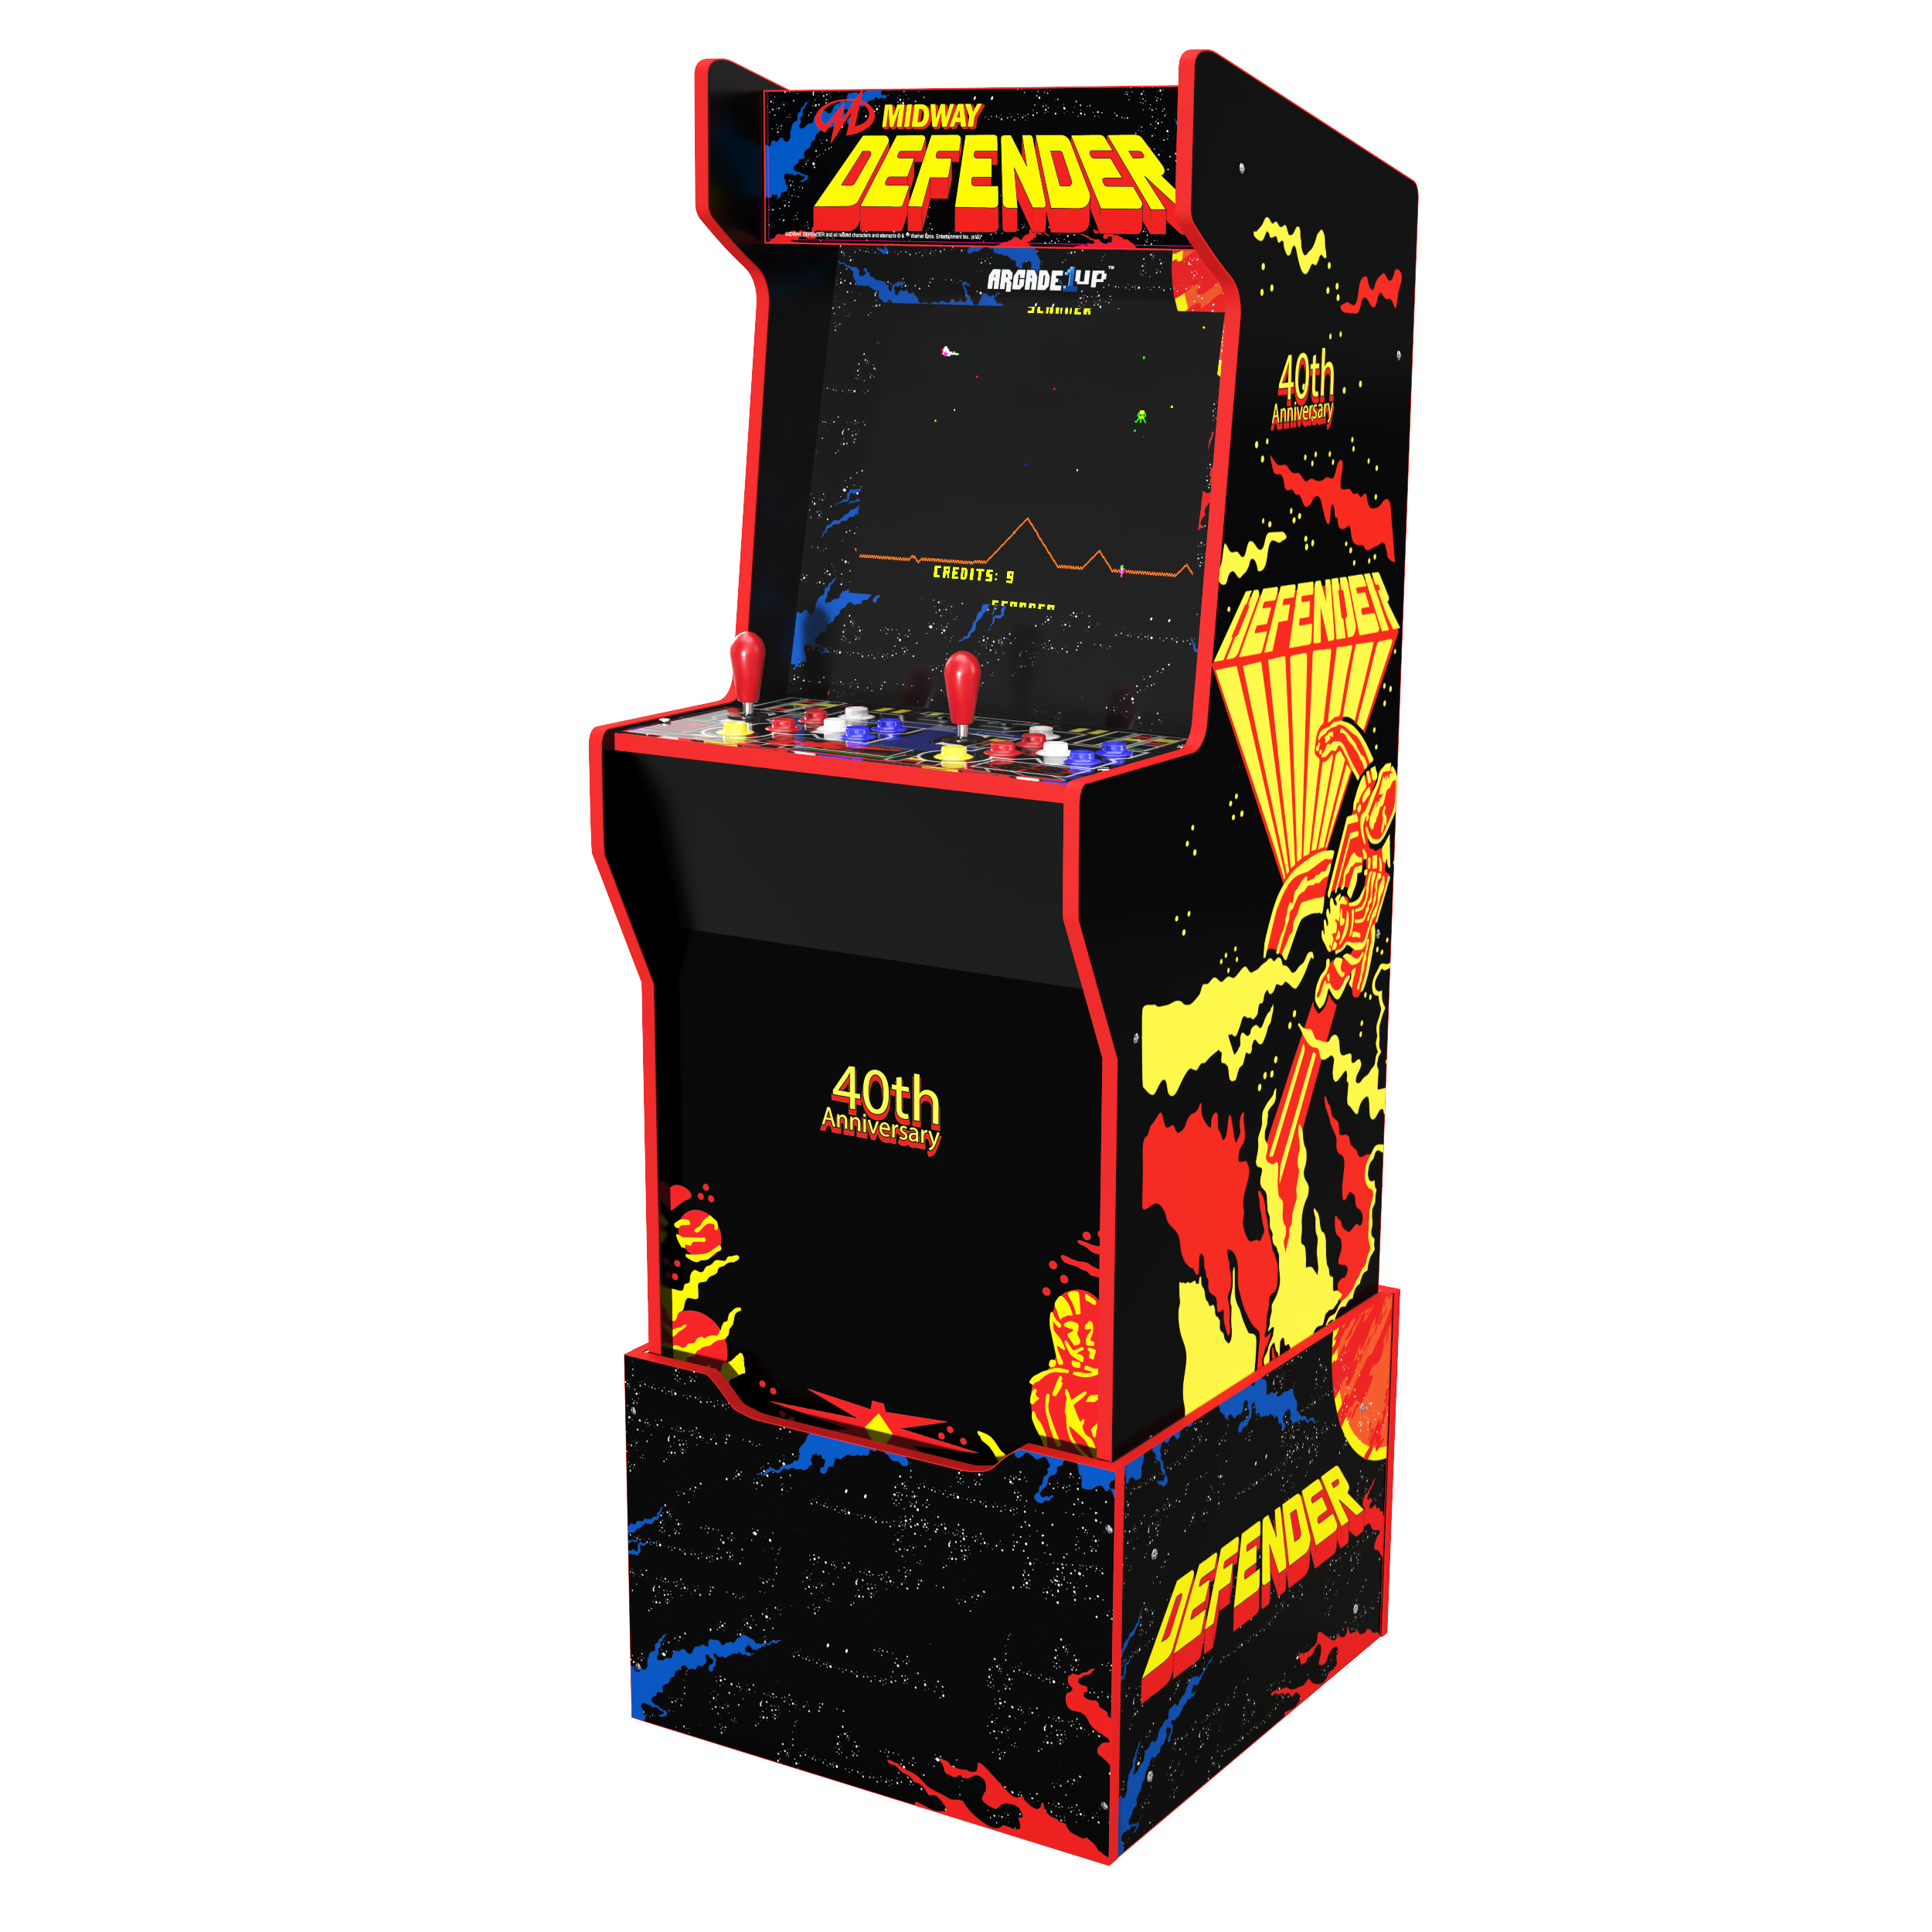 Defender 40th Anniversary 12-IN-1 Midway Legacy Edition Arcade with Licensed Riser and Light-Up Marquee, Arcade1Up - image 1 of 6